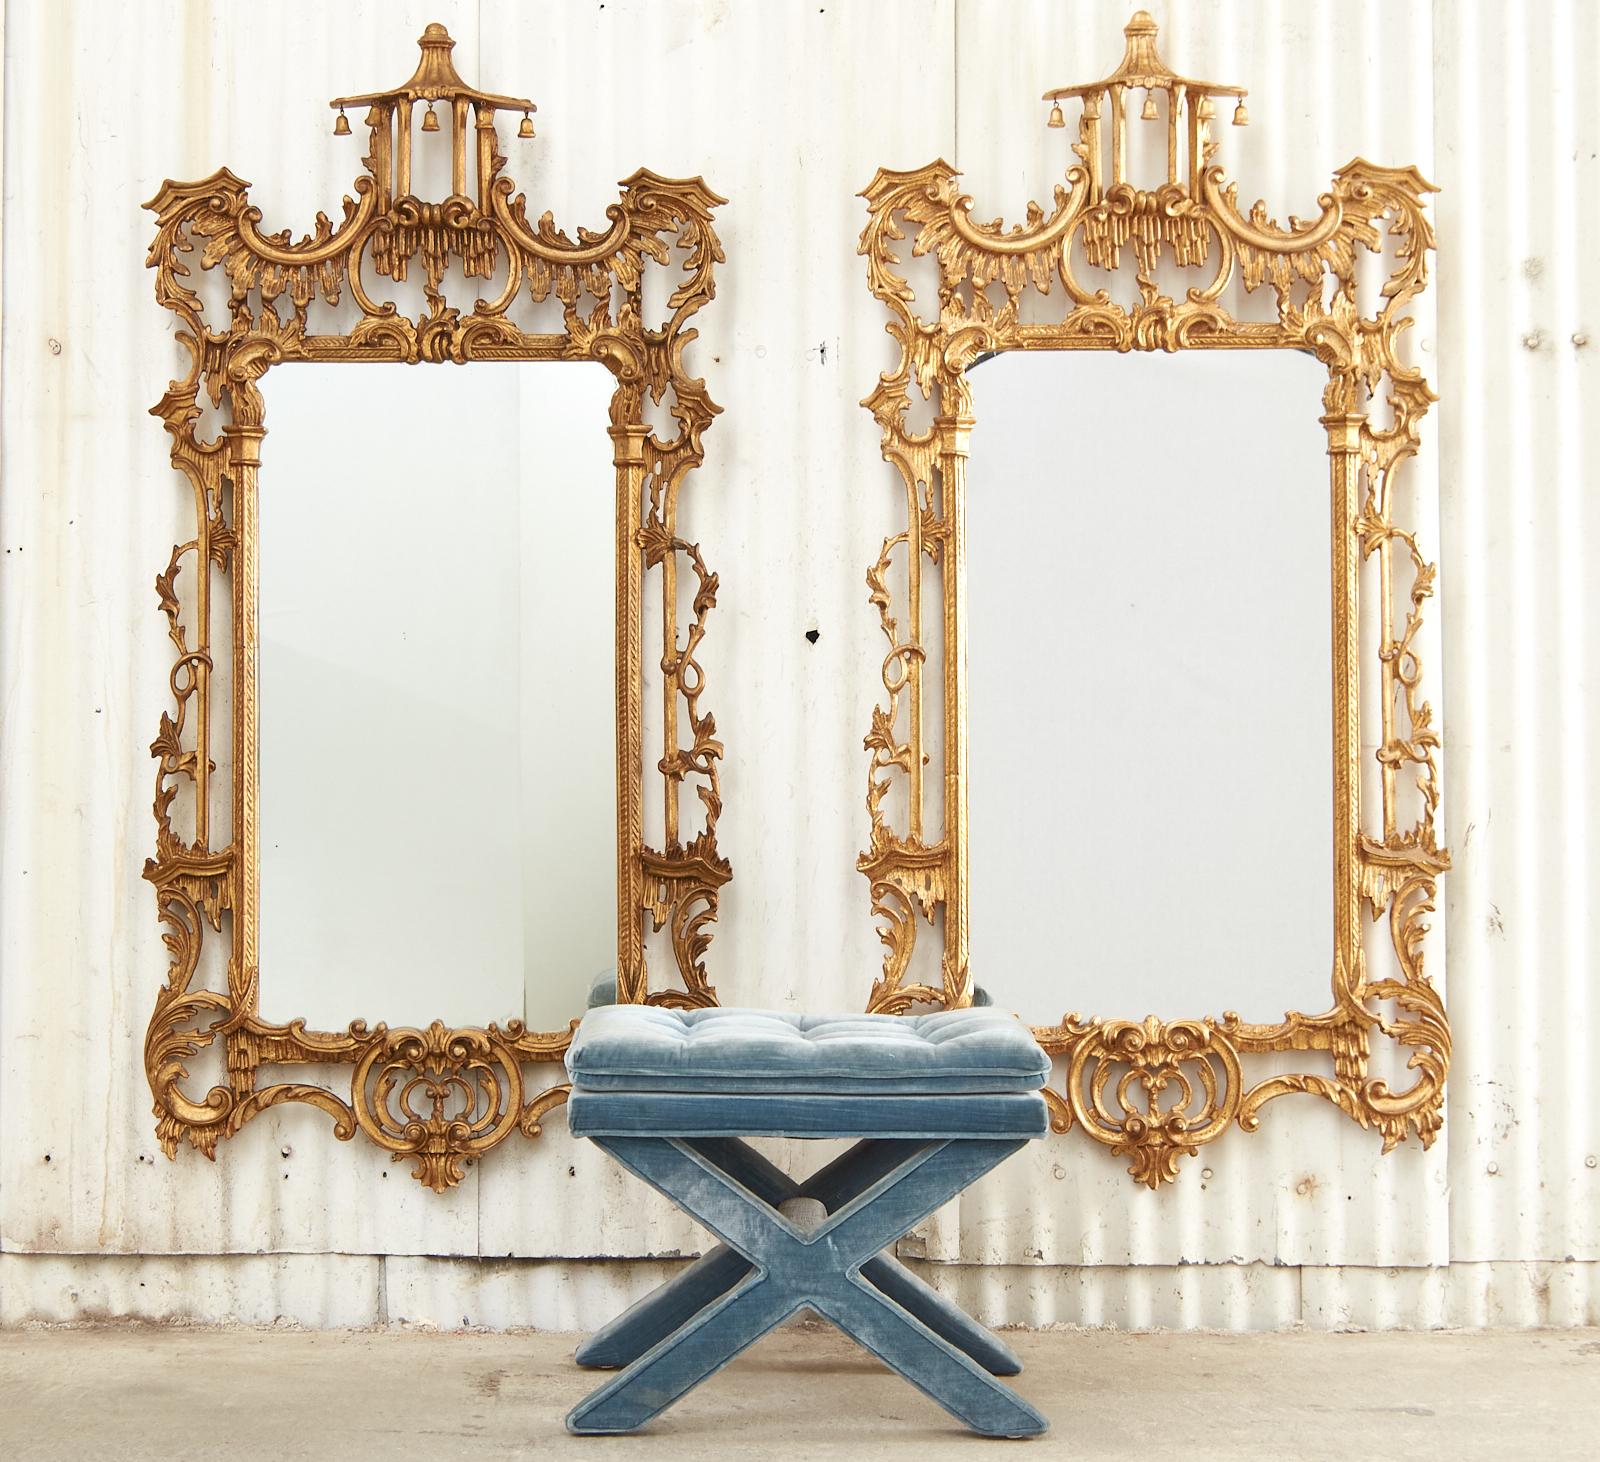 Opulent pair of matching Chinese Chippendale pagoda mirrors having two finishes. Made in Italy and finished in gilt and the other in bronze. The mirrors feature a highly carved frame decorated with C scrolls, acanthus, and climbing vines. Surmounted